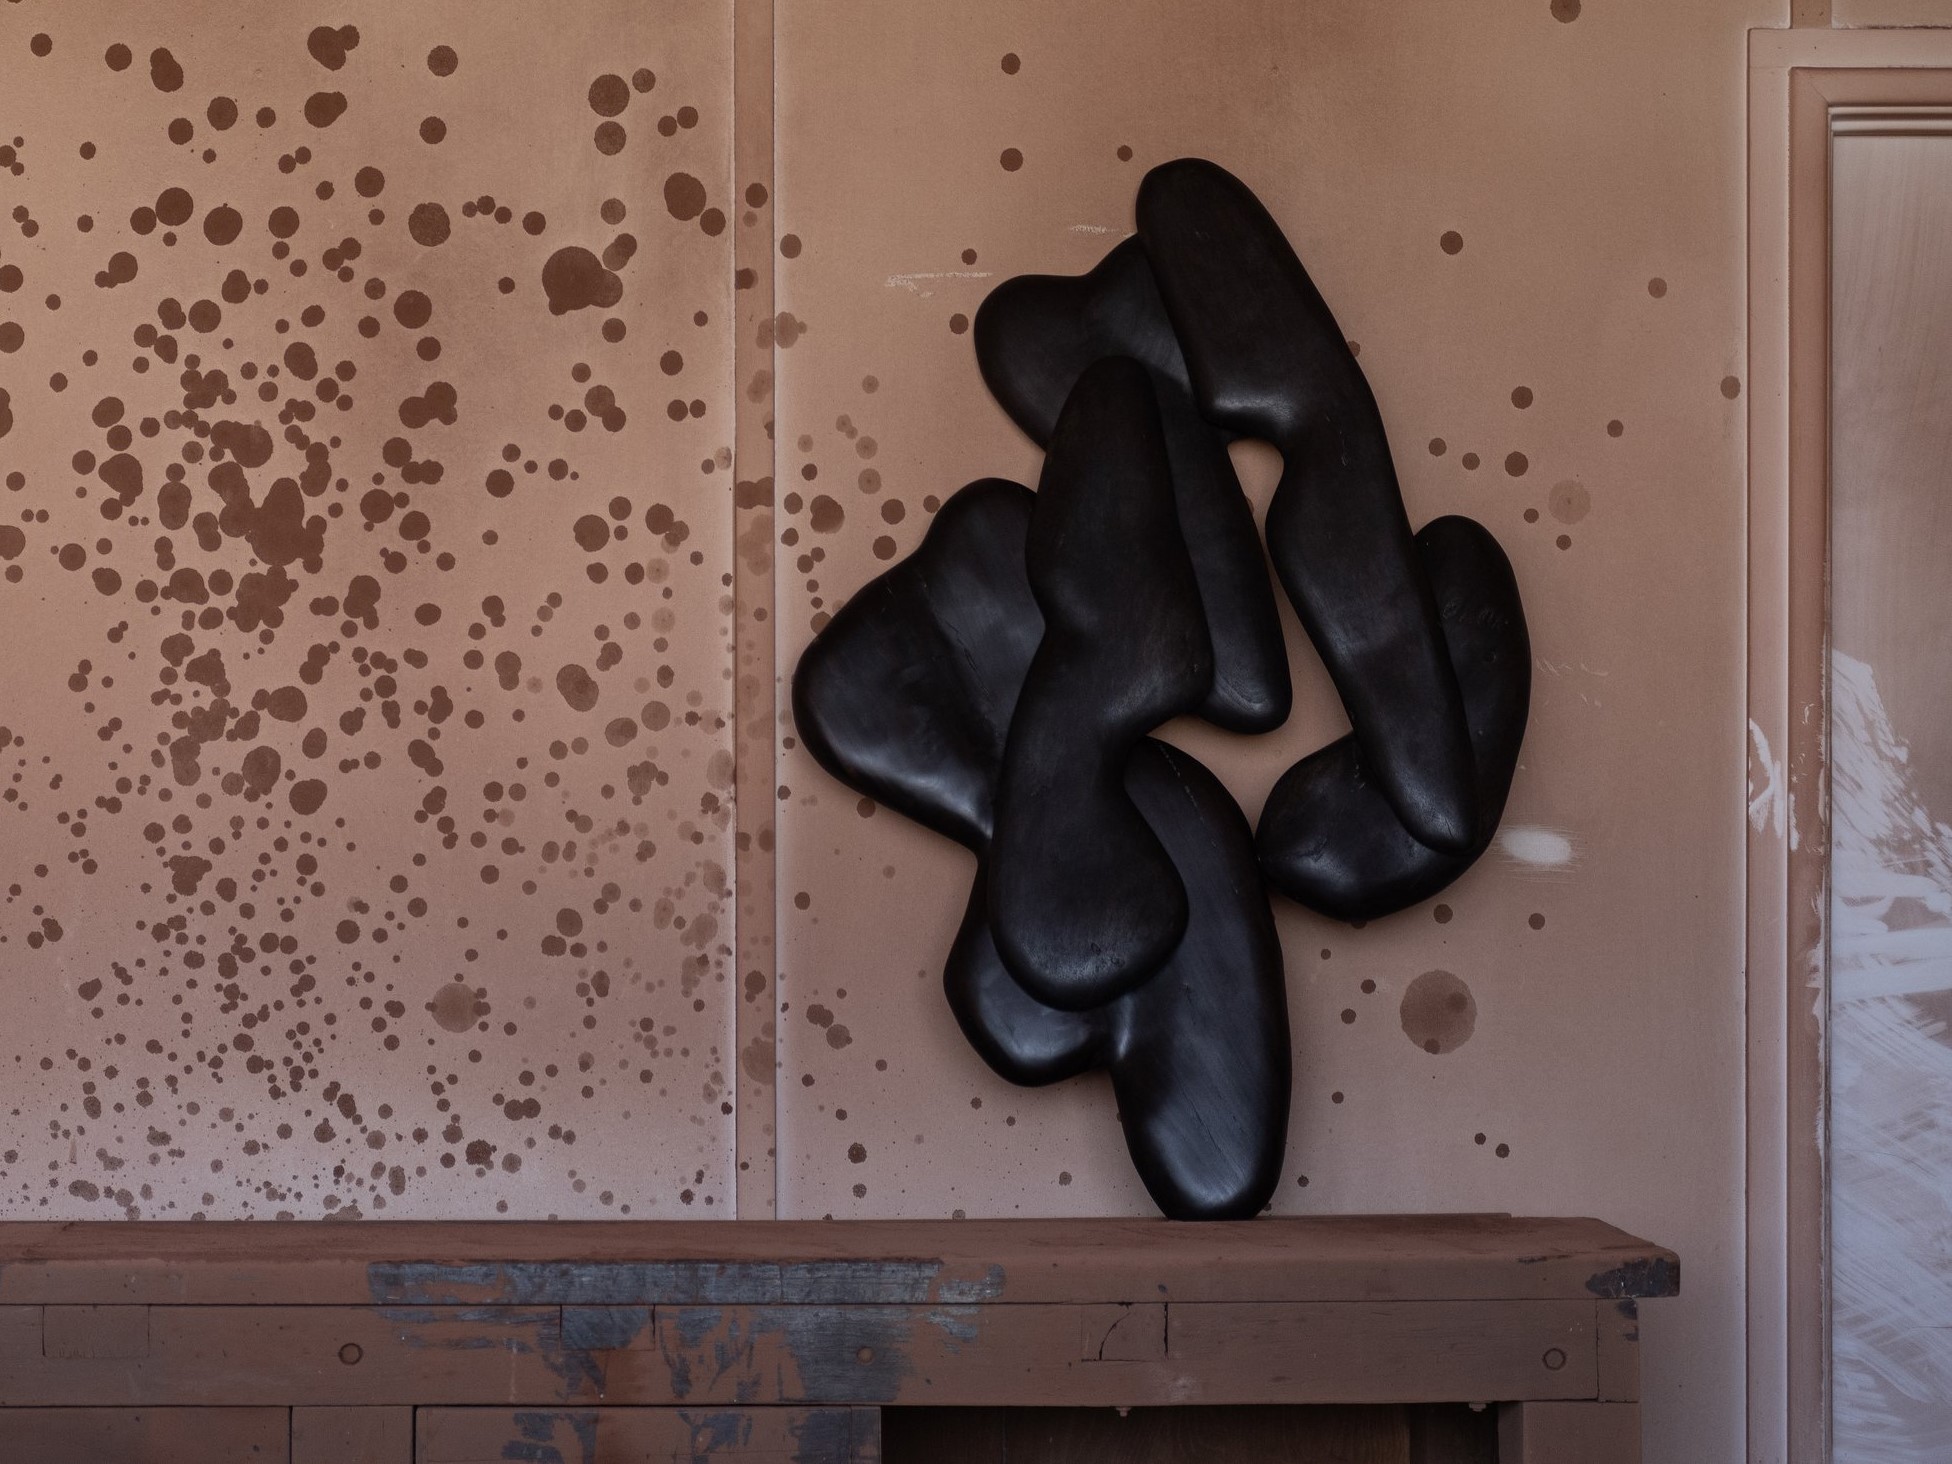 A flat sculpture leaning against the wall of the studio, made up on interlinked carved shapes